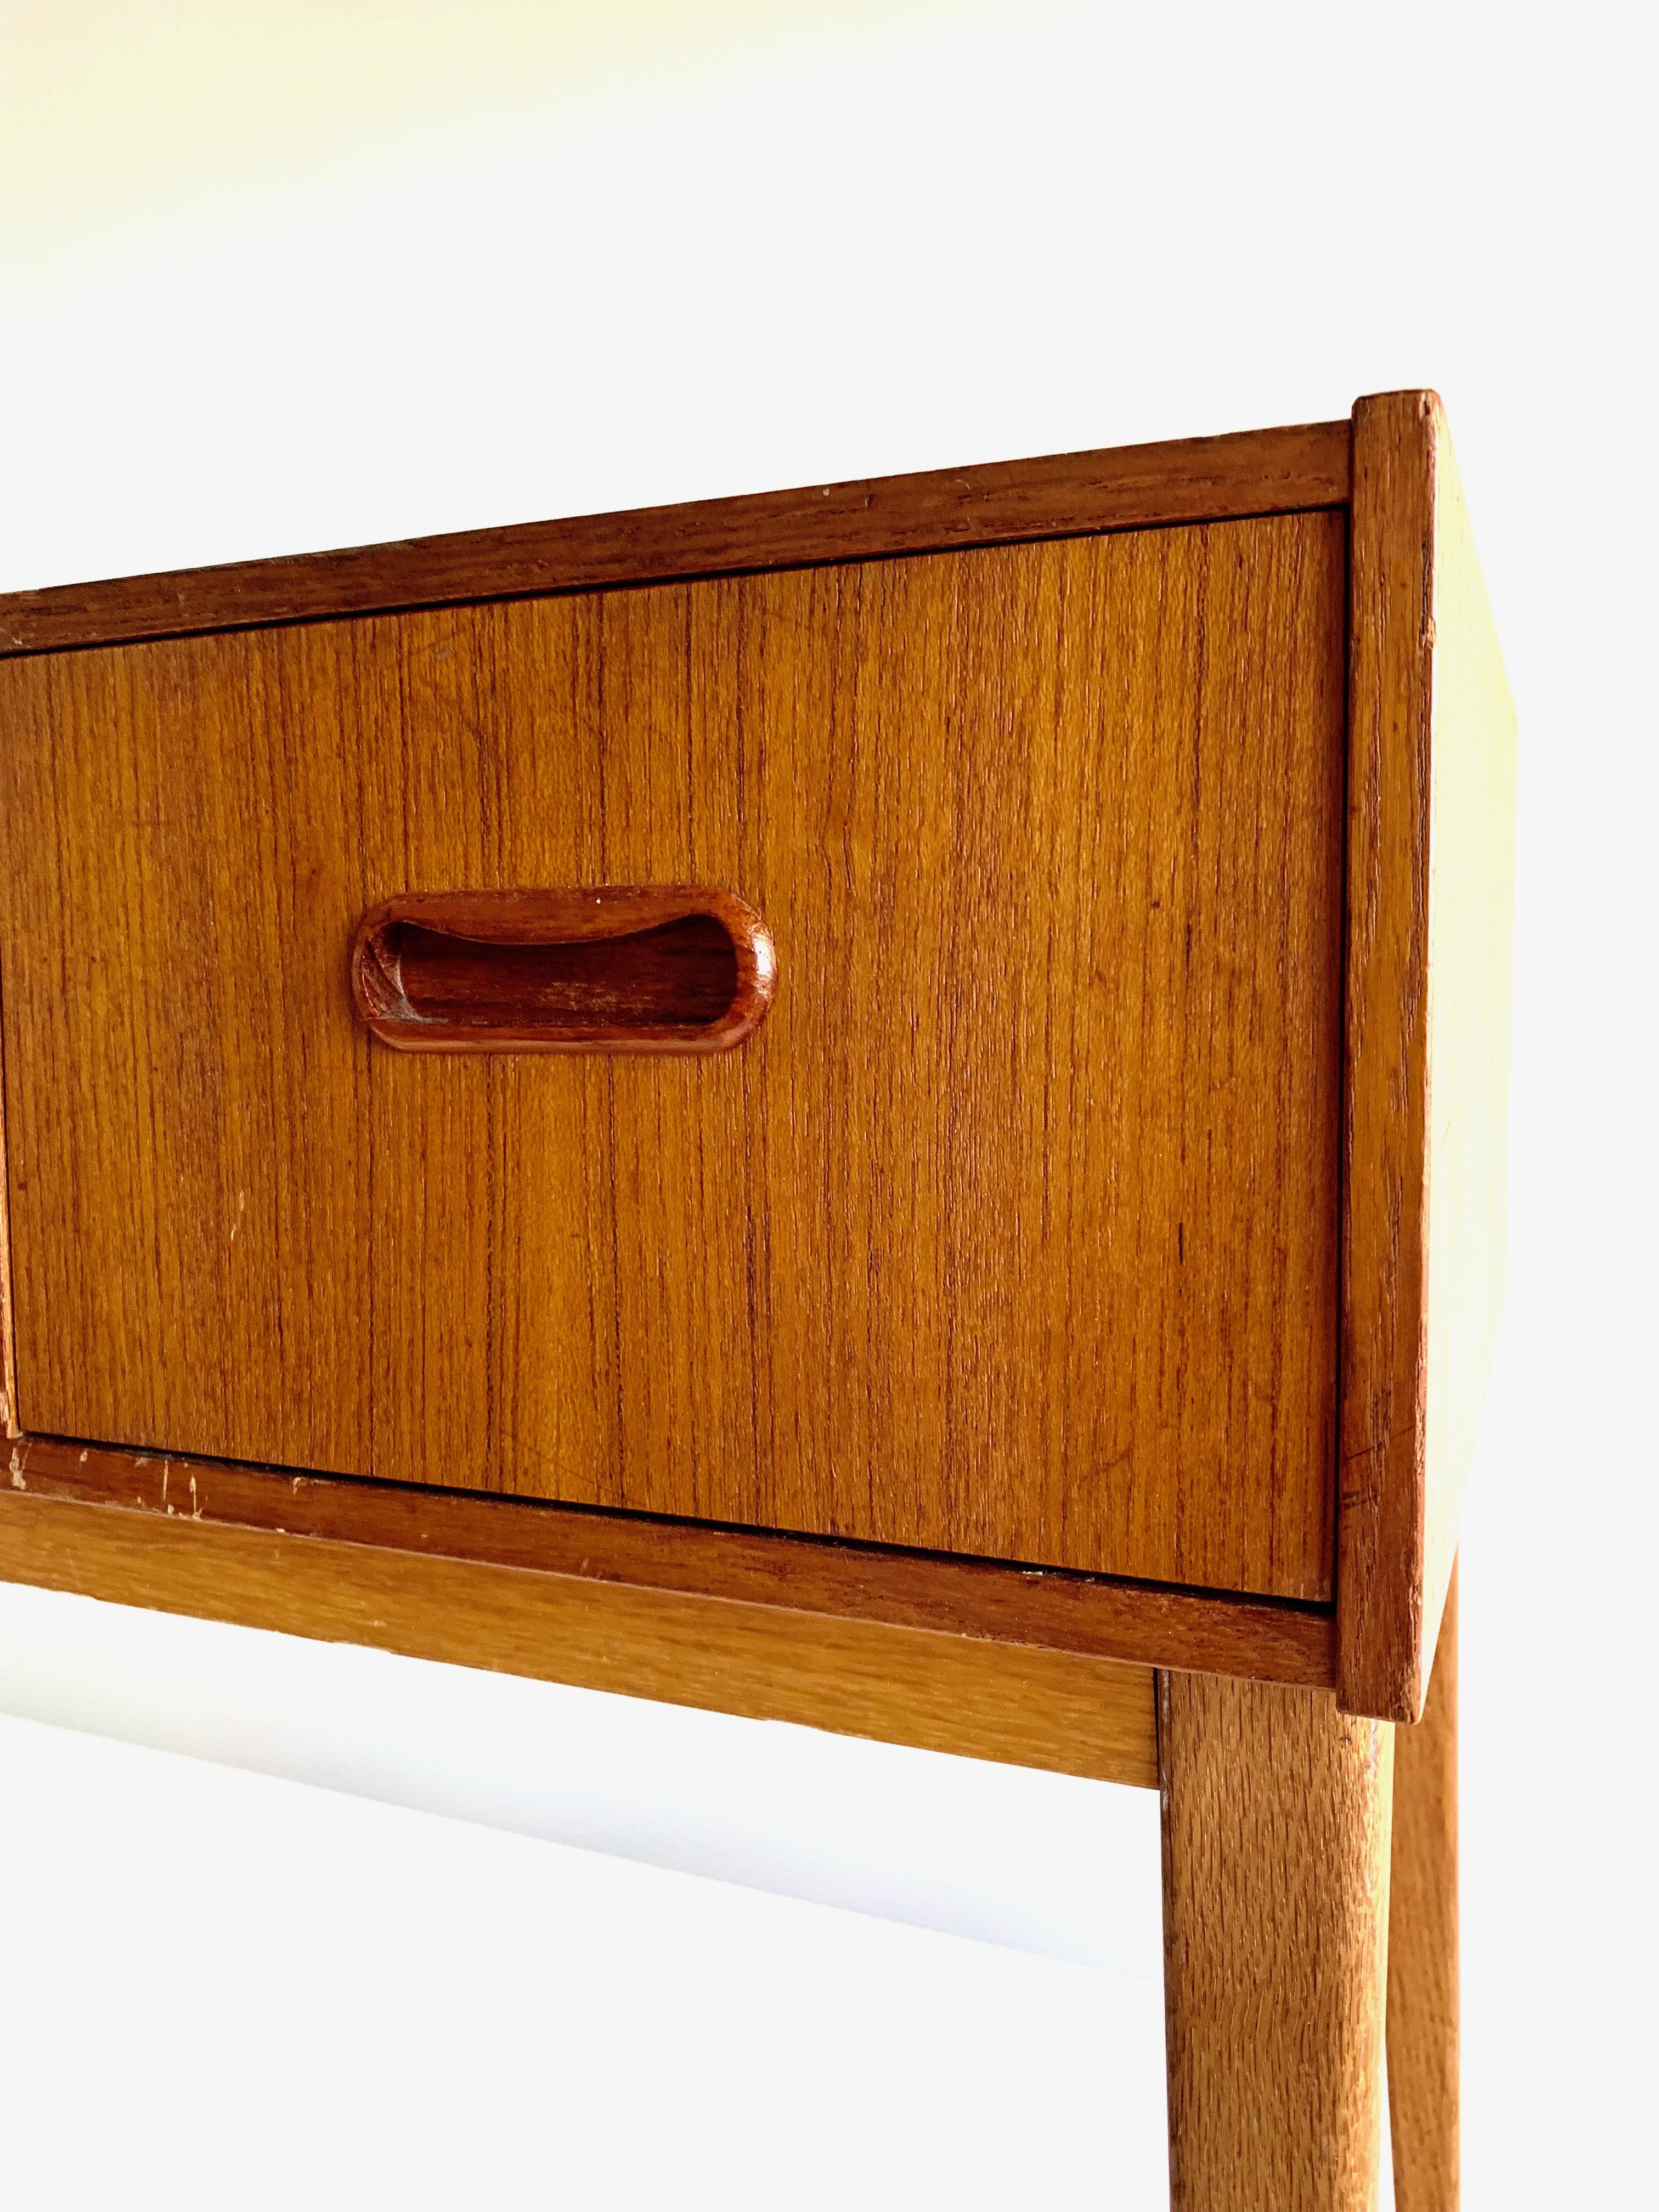 1960s Scandinavian Modern design chest featuring three drawers and tapered legs. 
The vintage piece is overall in good condition.